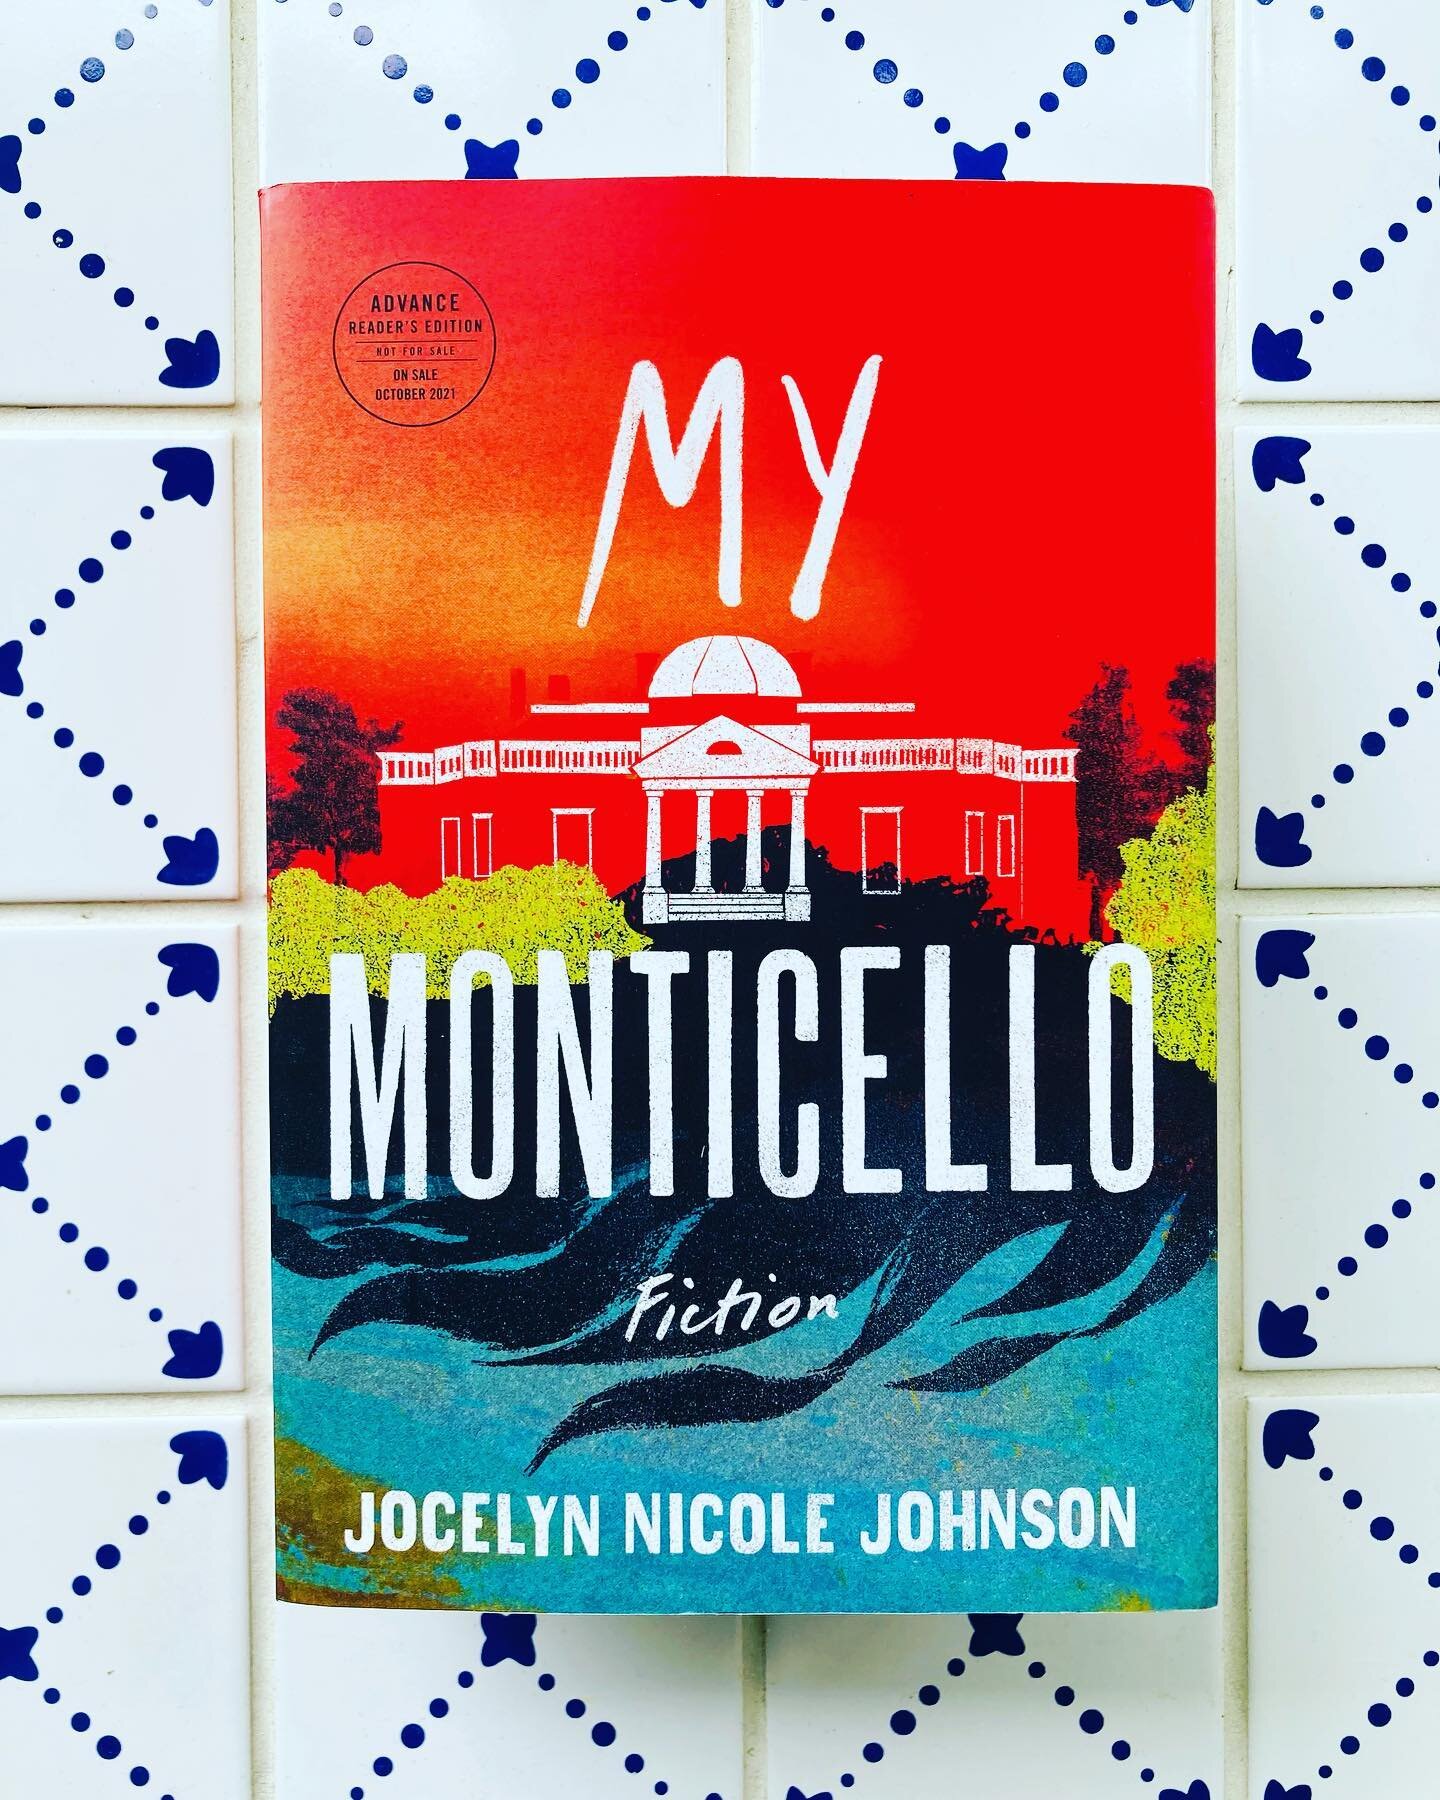 🚨More early praise for MY MONTICELLO by @jocelynnicole71 is in🚨We can&rsquo;t wait for you to read it this Fall! Link in bio to enter to win an advance copy on @goodreads ↗️

&ldquo;My Monticello is a magnificent debut that holds so much in its gaz